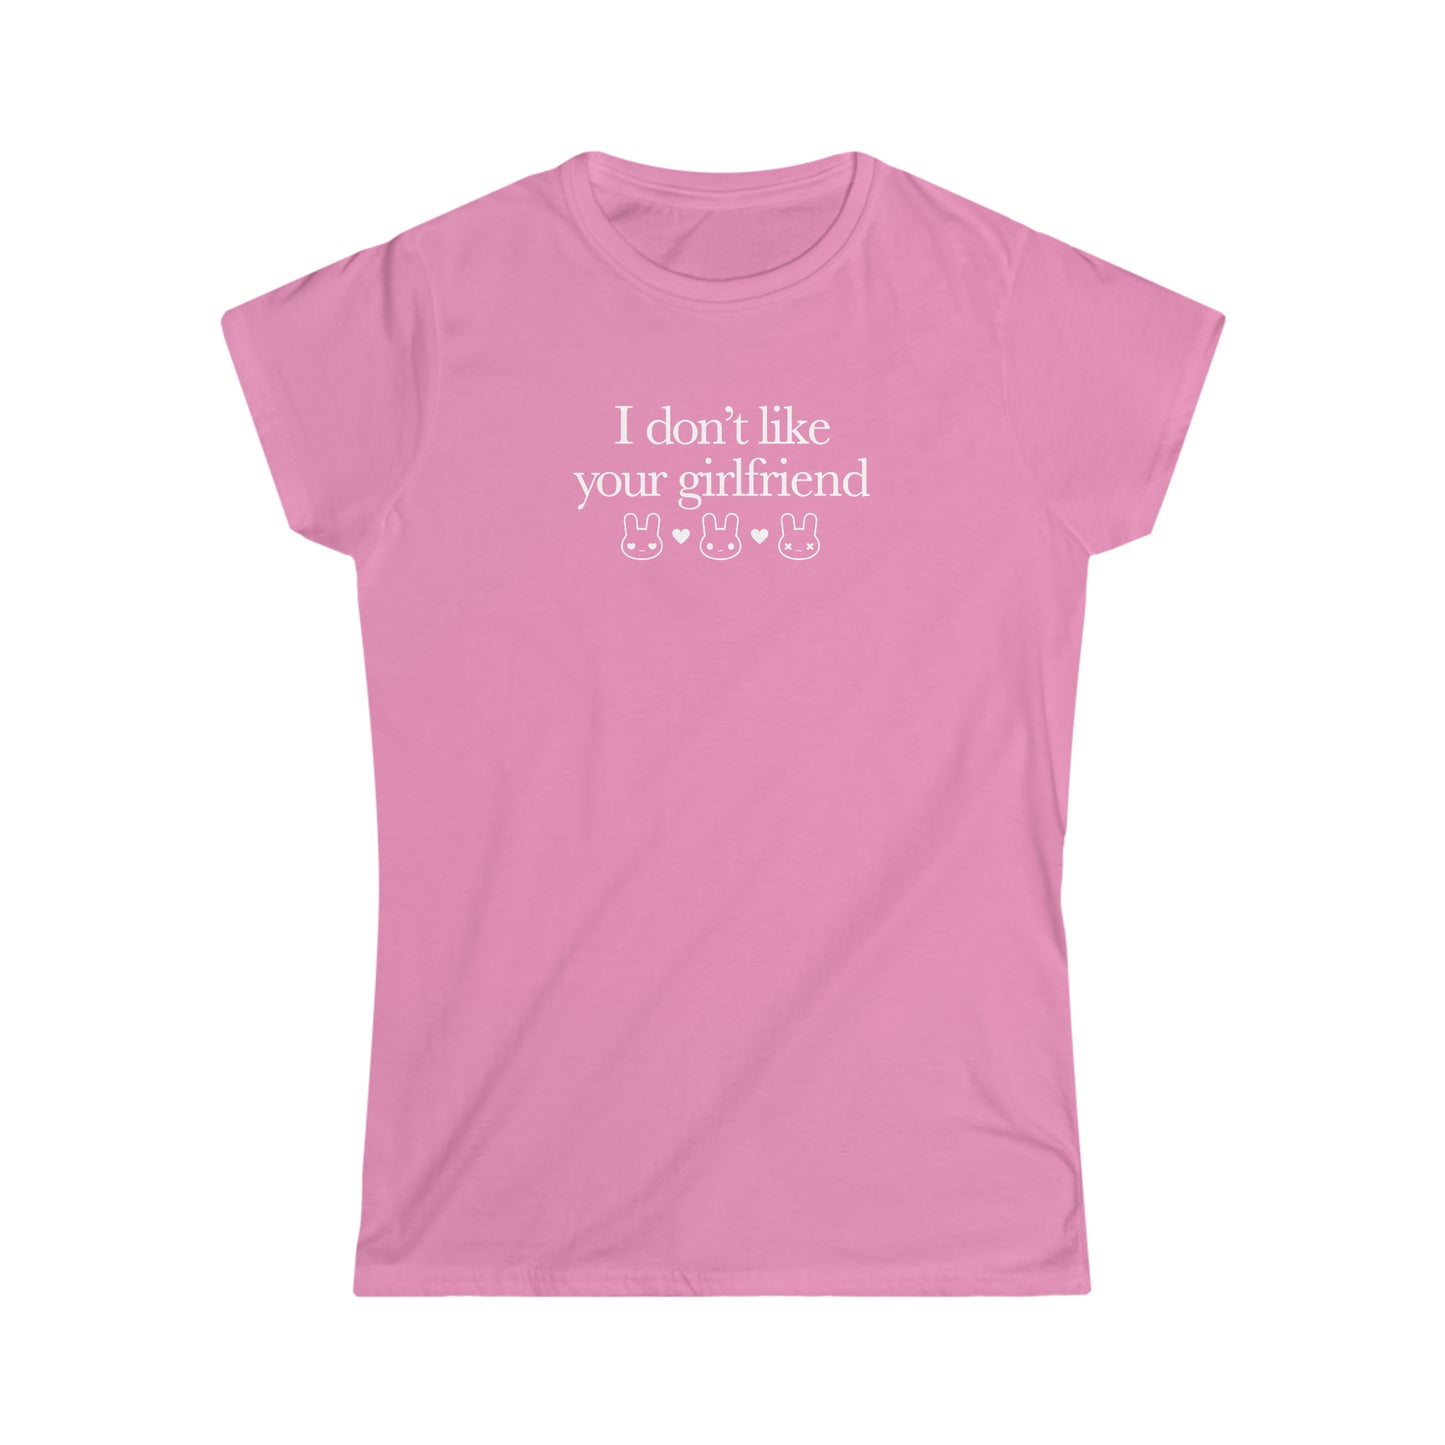 I Don't Like Your Girlfriend Girly T-Shirt